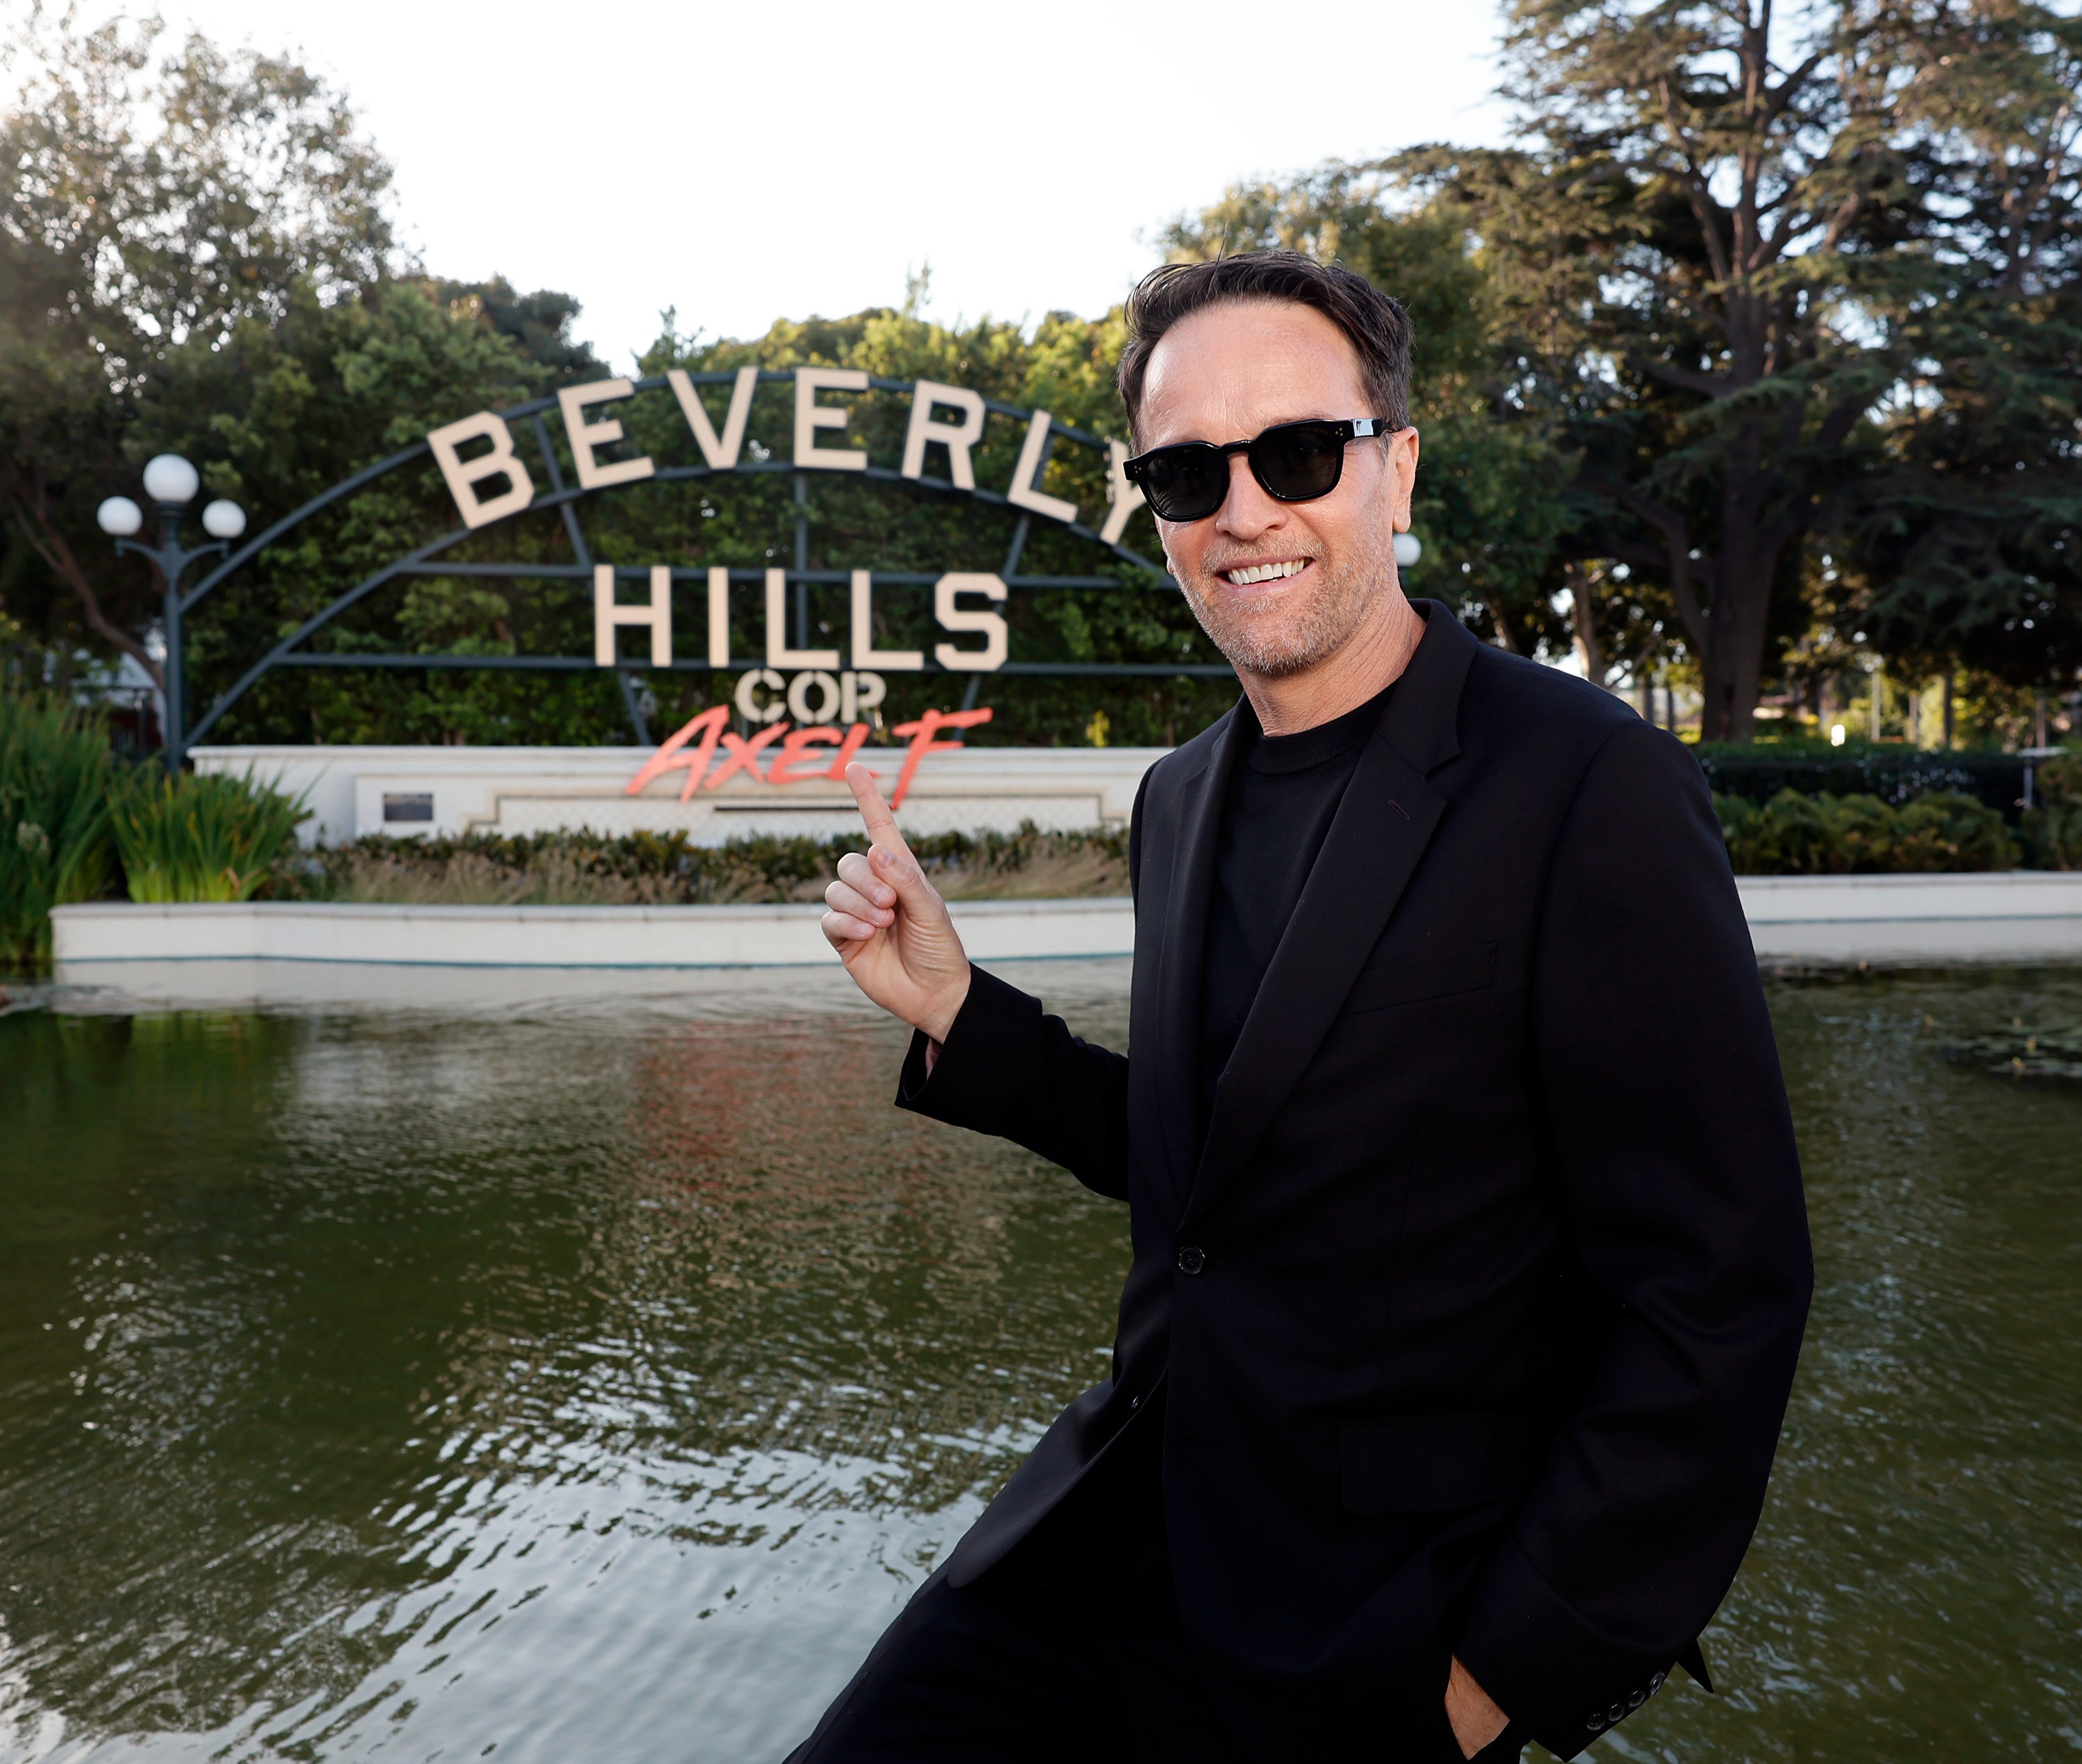 BEVERLY HILLS, CALIFORNIA - JUNE 20: Mark Molloy attends the Beverly Hills Cop: Axel F World Premiere at Wallis Annenberg Center for the Performing Arts on June 20, 2024 in Beverly Hills, California. (Photo by Emma McIntyre/Getty Images for Netflix)